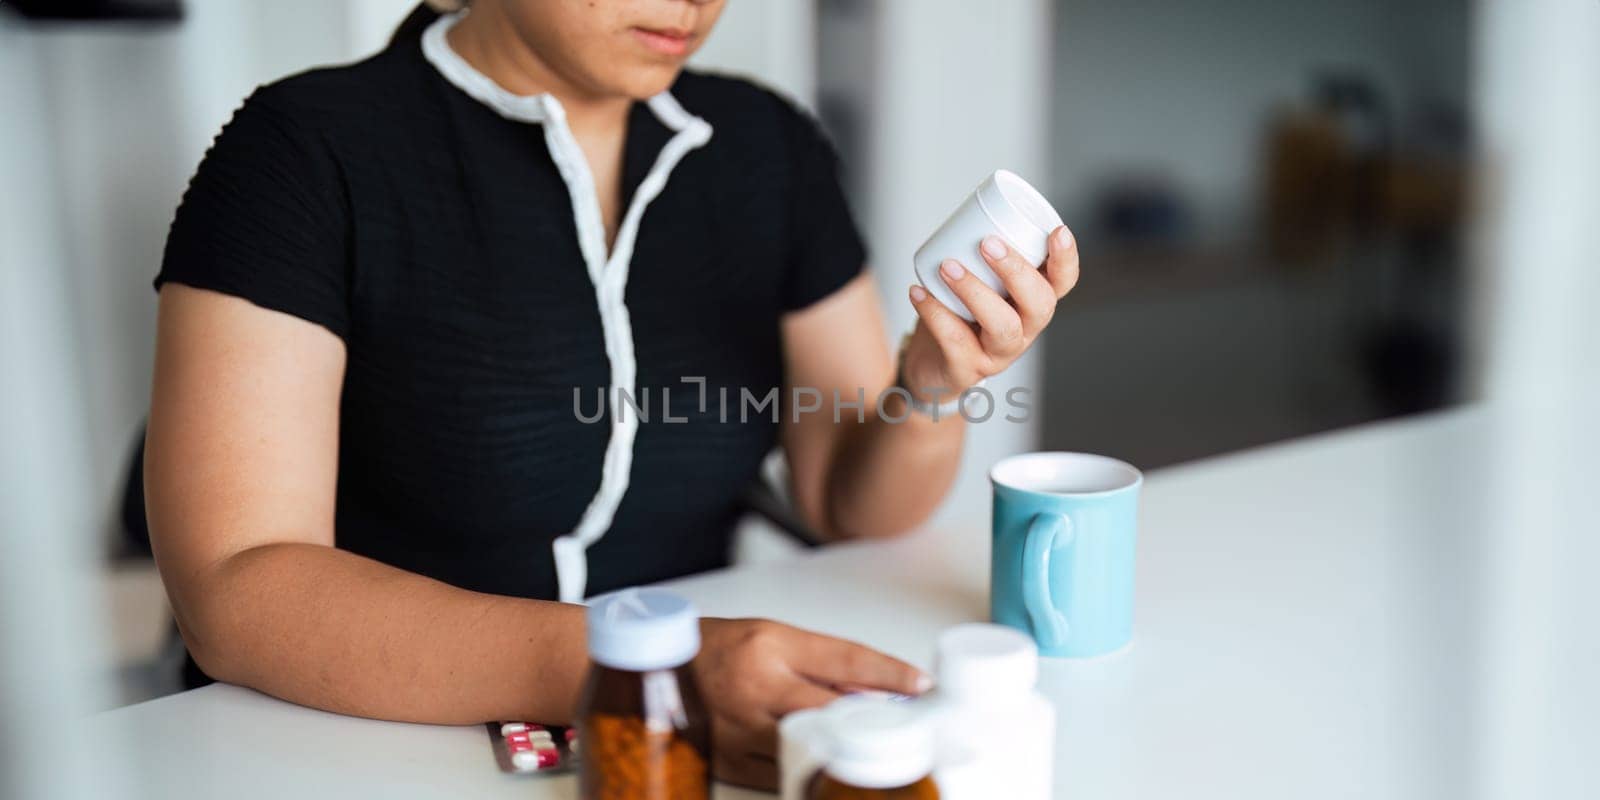 Woman hold bottle of drug tablet painkiller or vitamin supplement reading label ready to organizing medicine at home. medication healthcare concept.